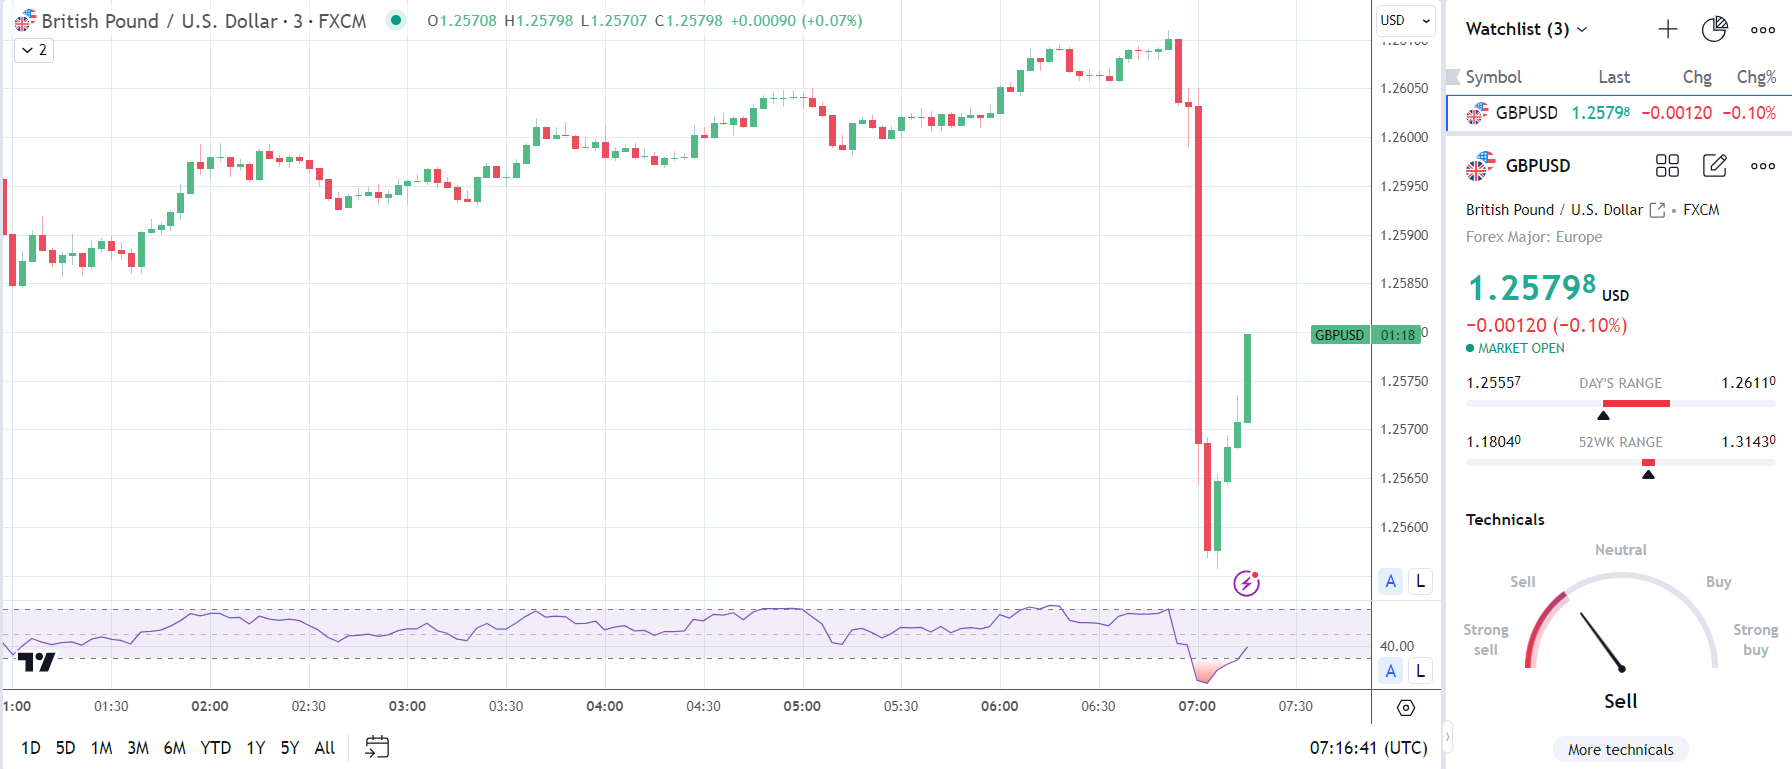 GBP/USD reacts to the UK GDP Report.